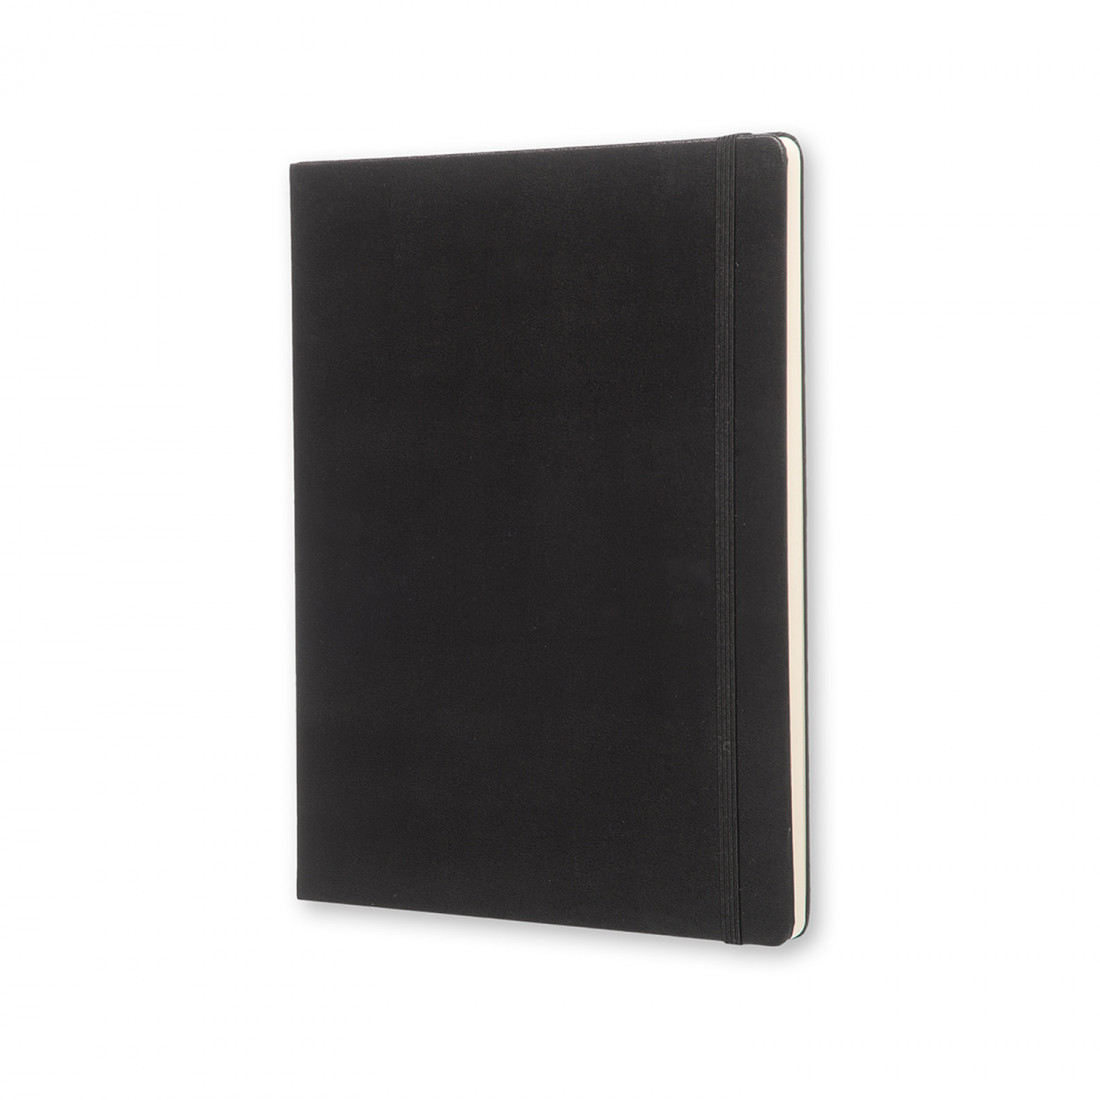 Notebook Extra Large 19x25 Dotted Black Hard Cover Moleskine